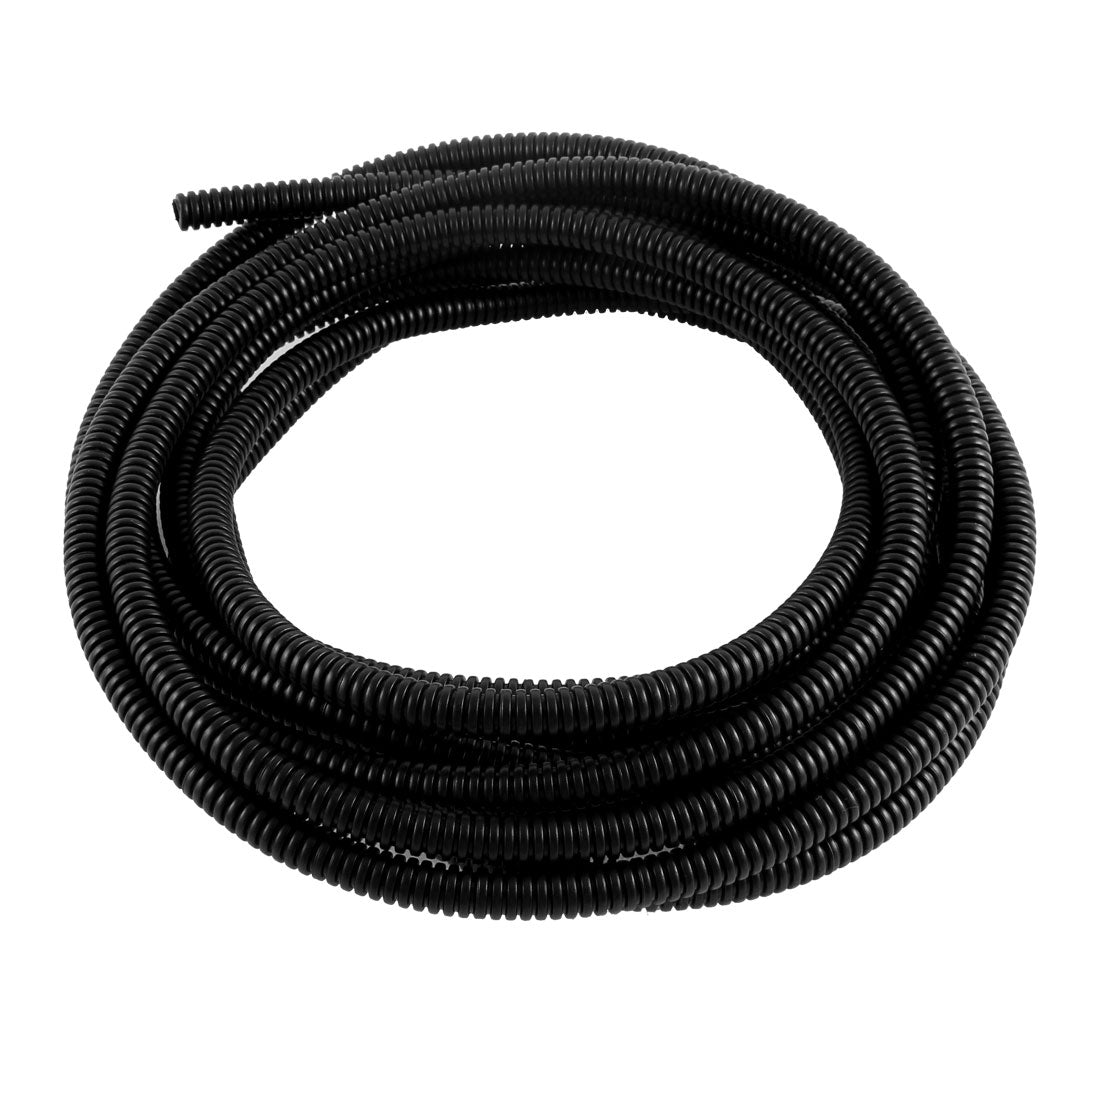 uxcell Uxcell 5.7 M 8 x 10 mm Plastic Flexible Corrugated Conduit Tube for Garden,Office Black